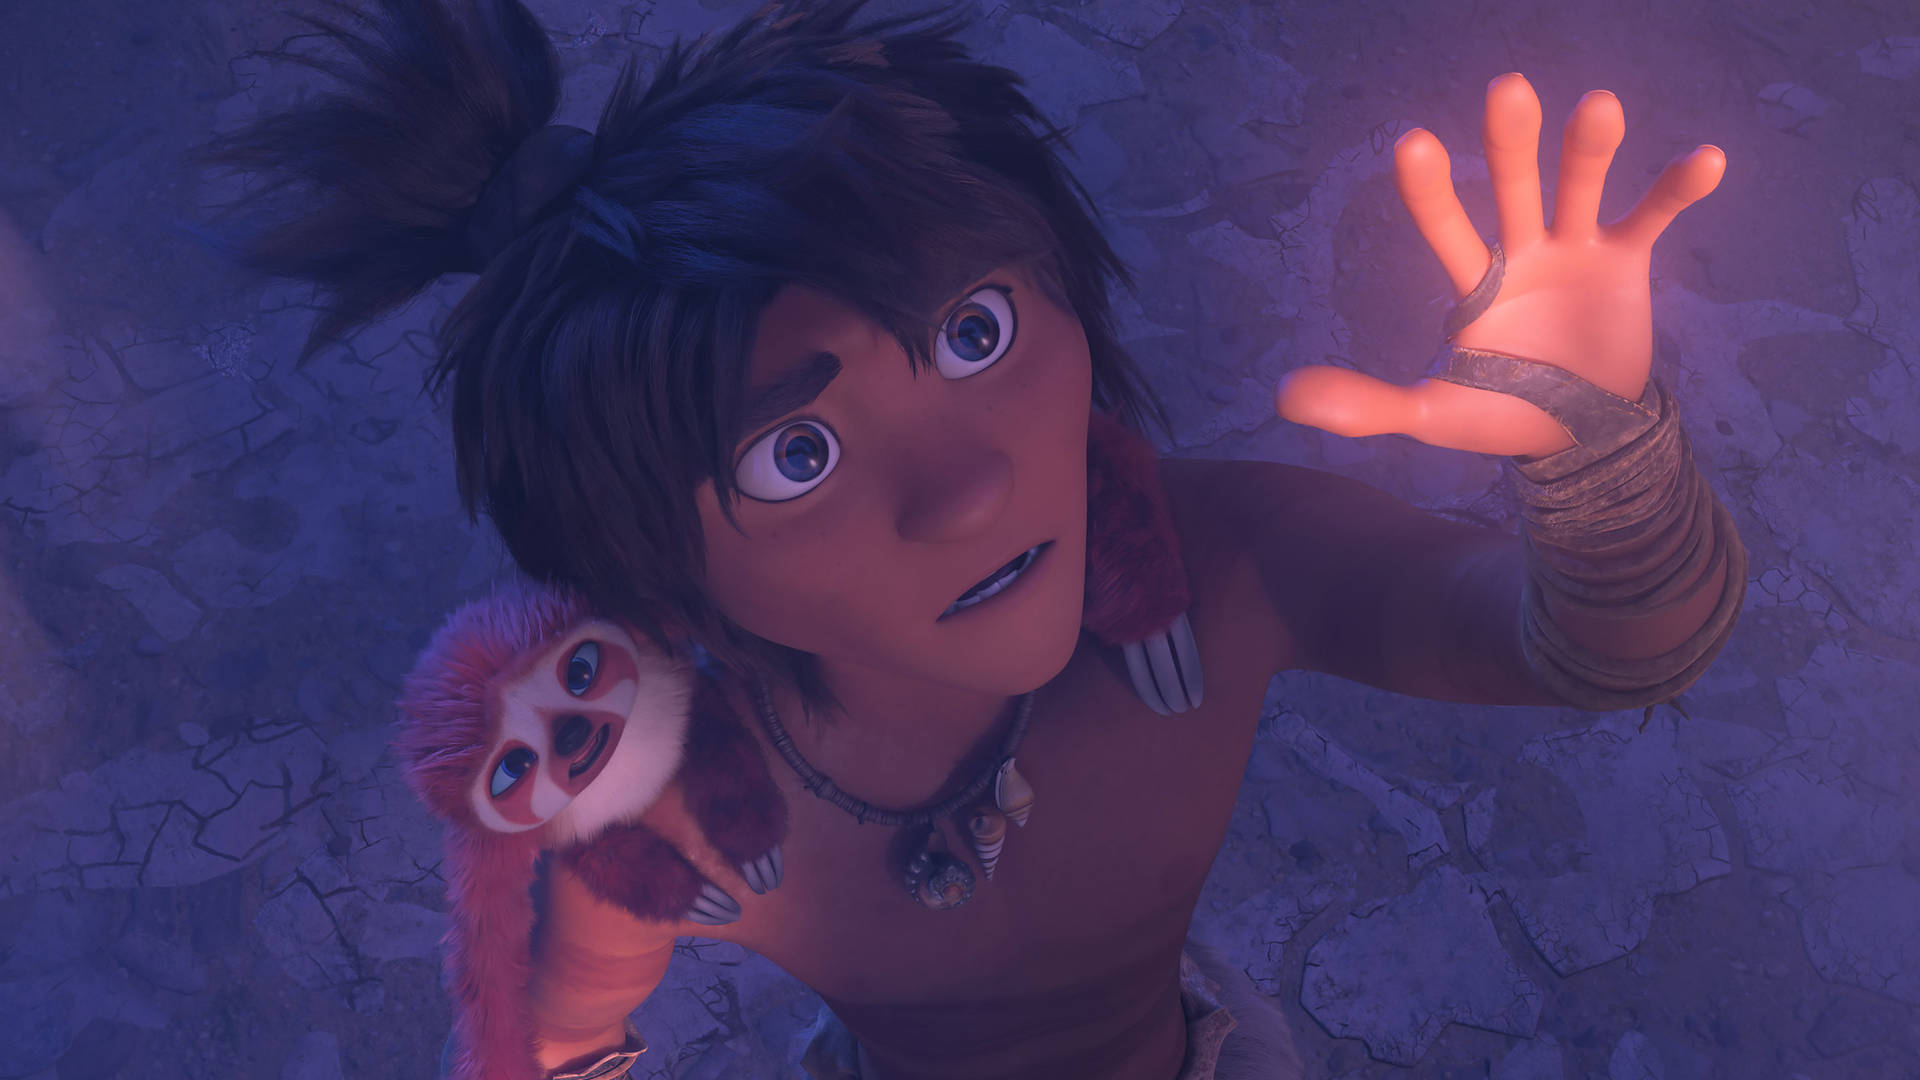 Guy And Belt From The Croods Wallpaper